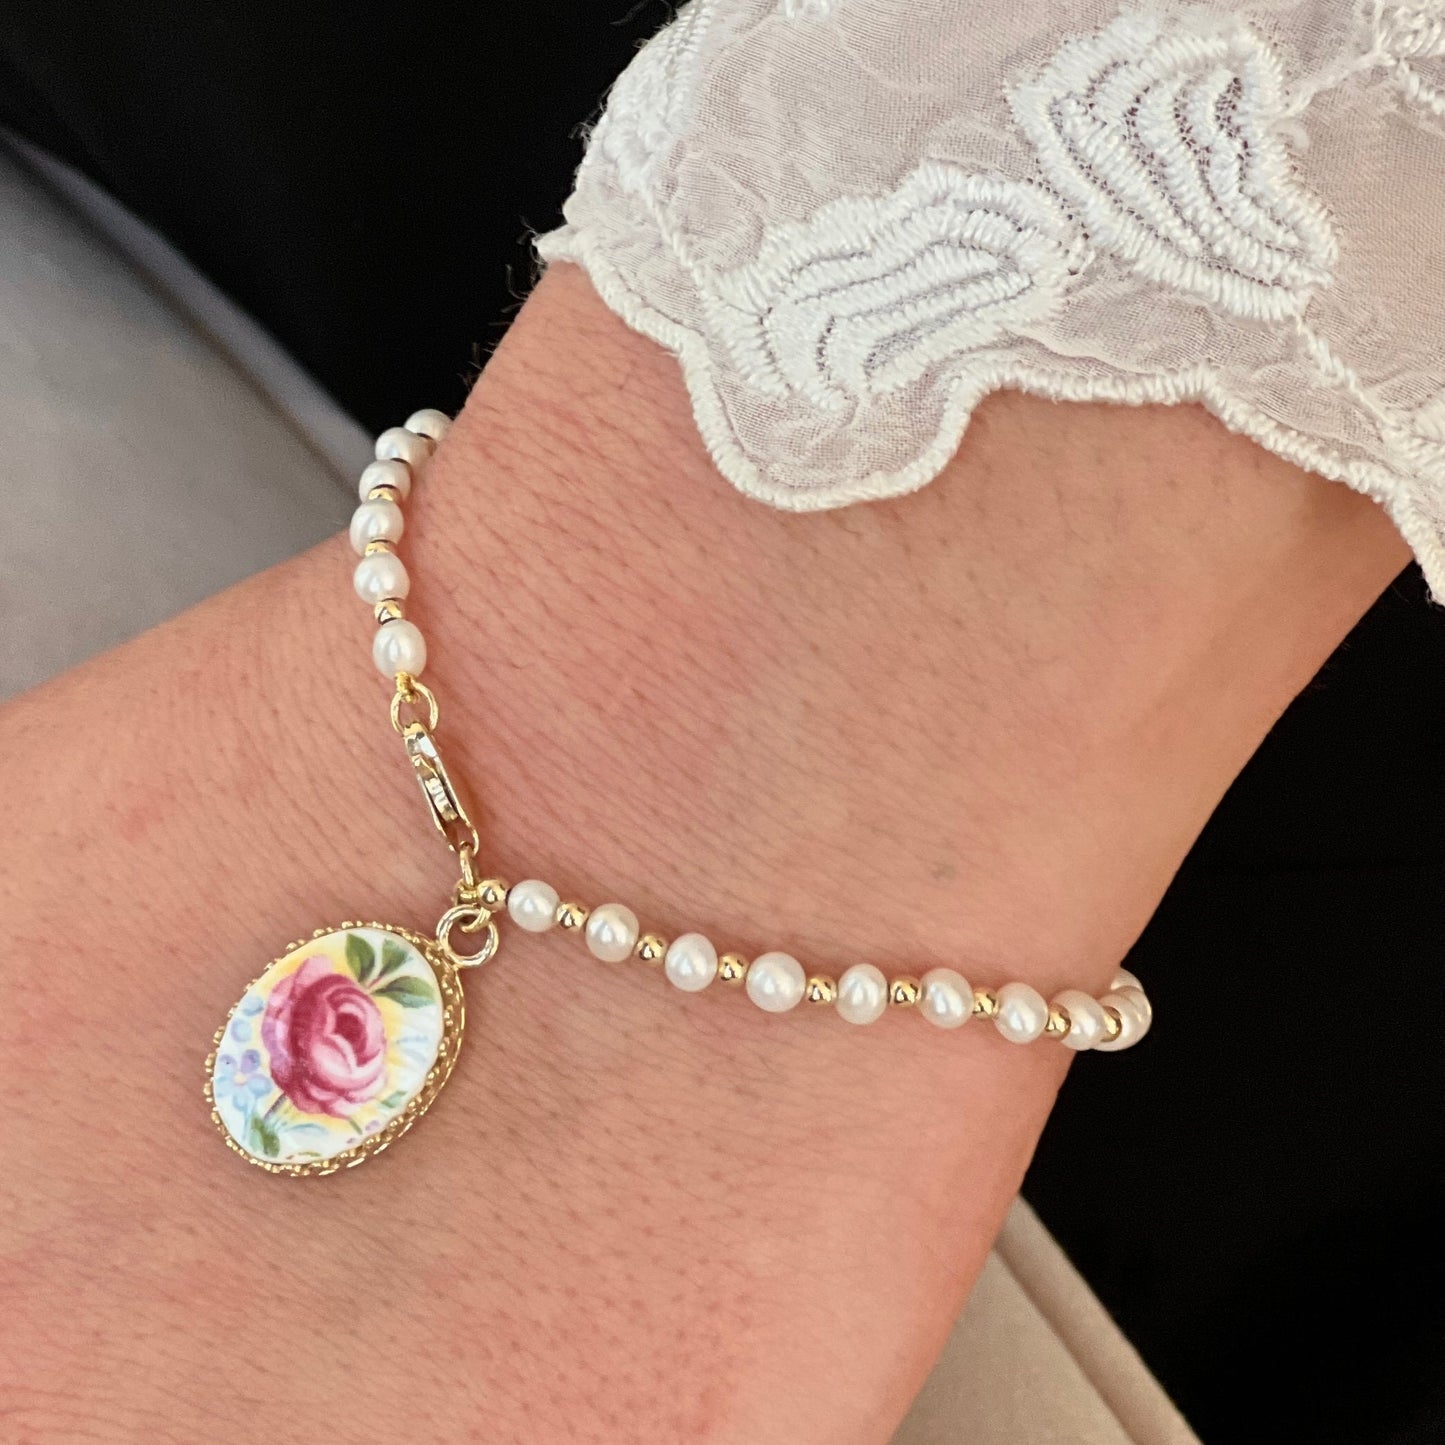 Dainty Pearl and 14k Solid Gold Bracelet, Royal Albert Broken China Jewelry, Romantic 20th Anniversary Gift for Wife